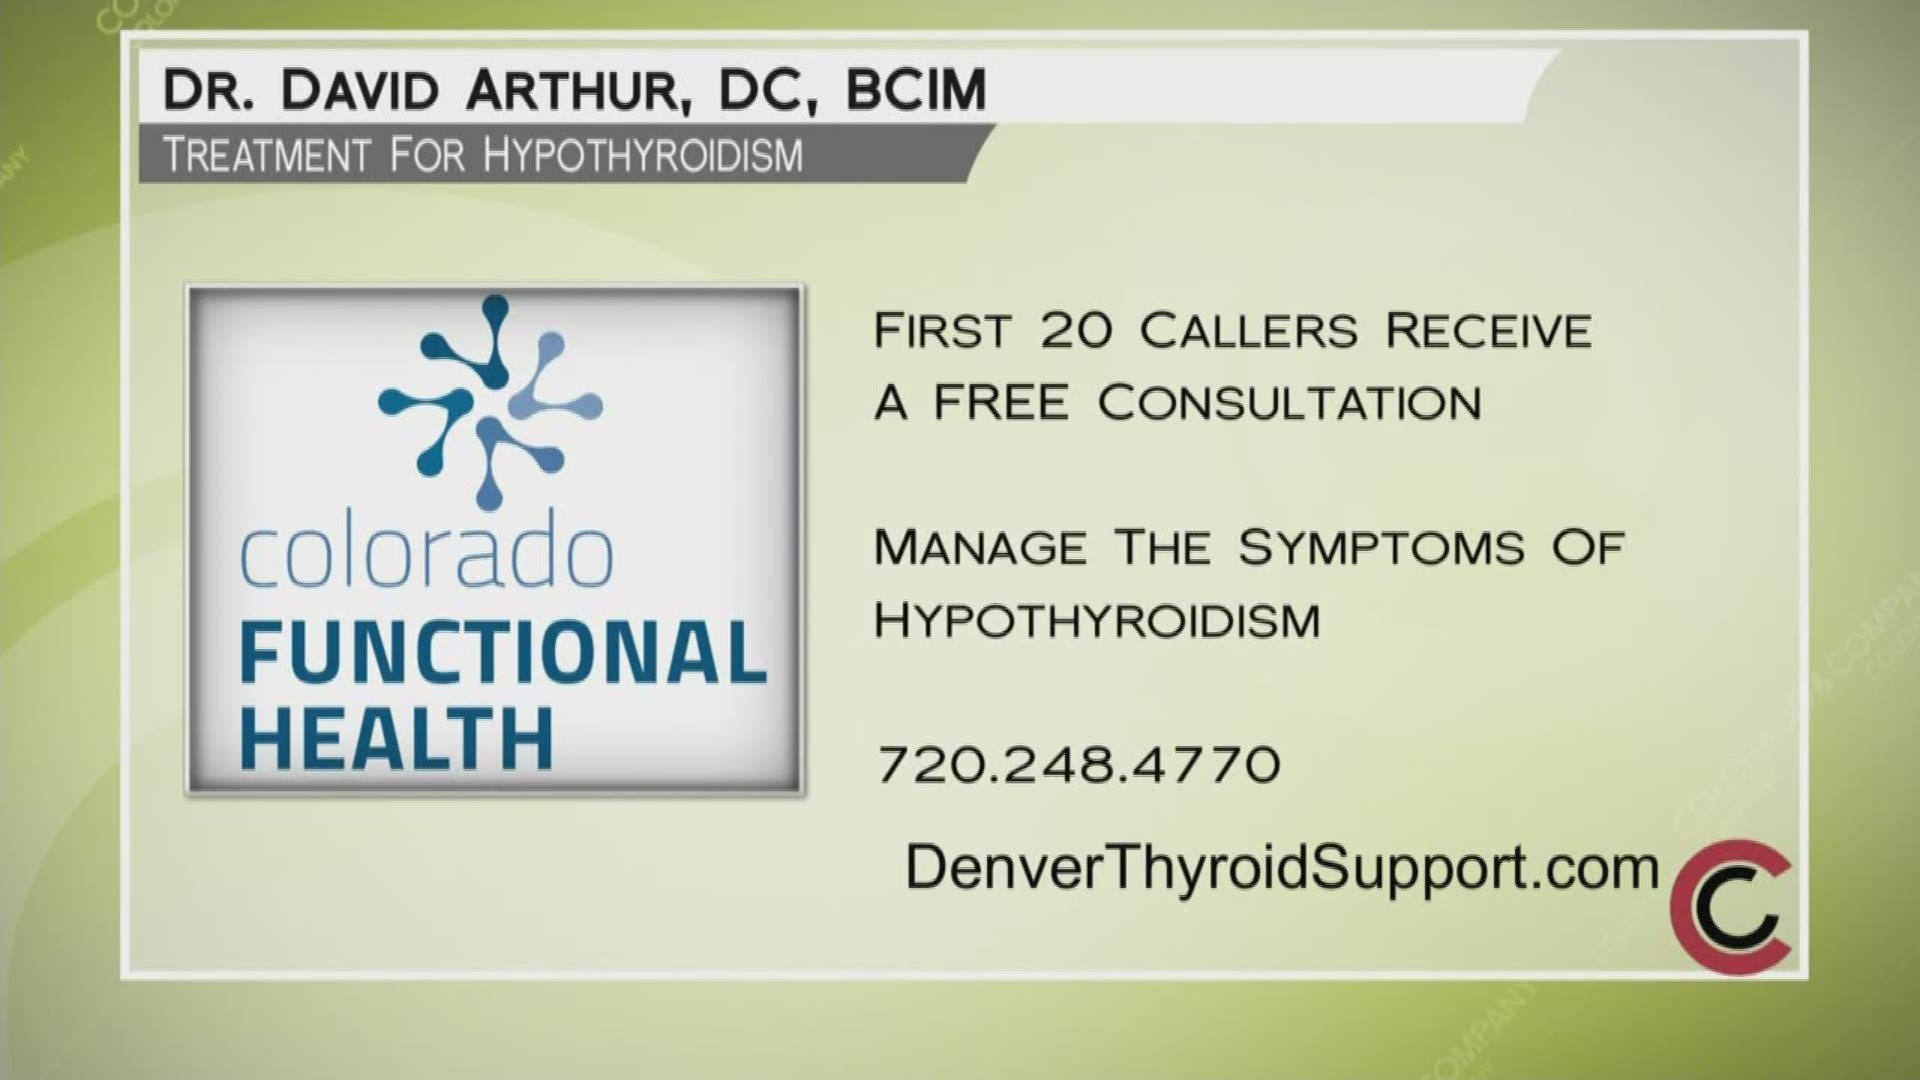 Mention COCO when you call Dr. Arthur at 720.248.4770. The first 20 callers will get a free initial consultation. Learn more at DenverThyroidSupport.com.